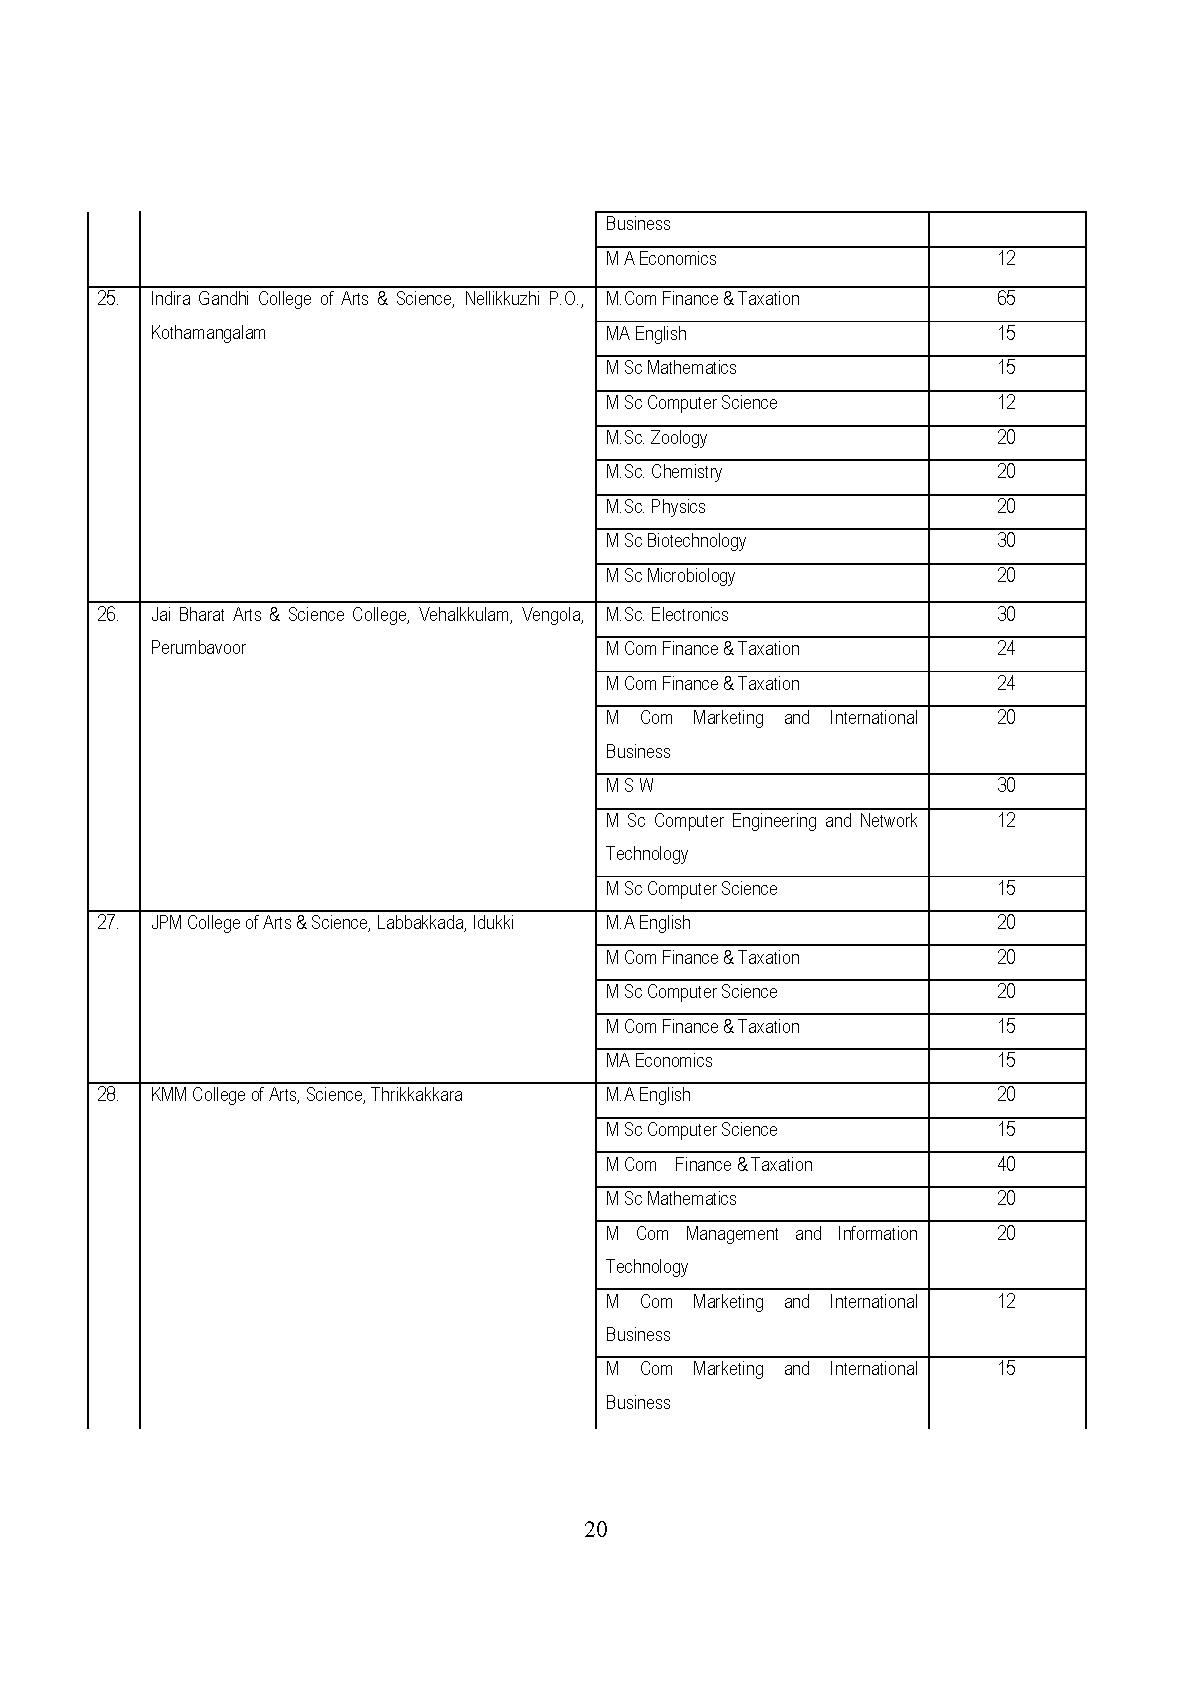 List of Unaided Arts and Science Colleges of MG University 2019 - Notification Image 3